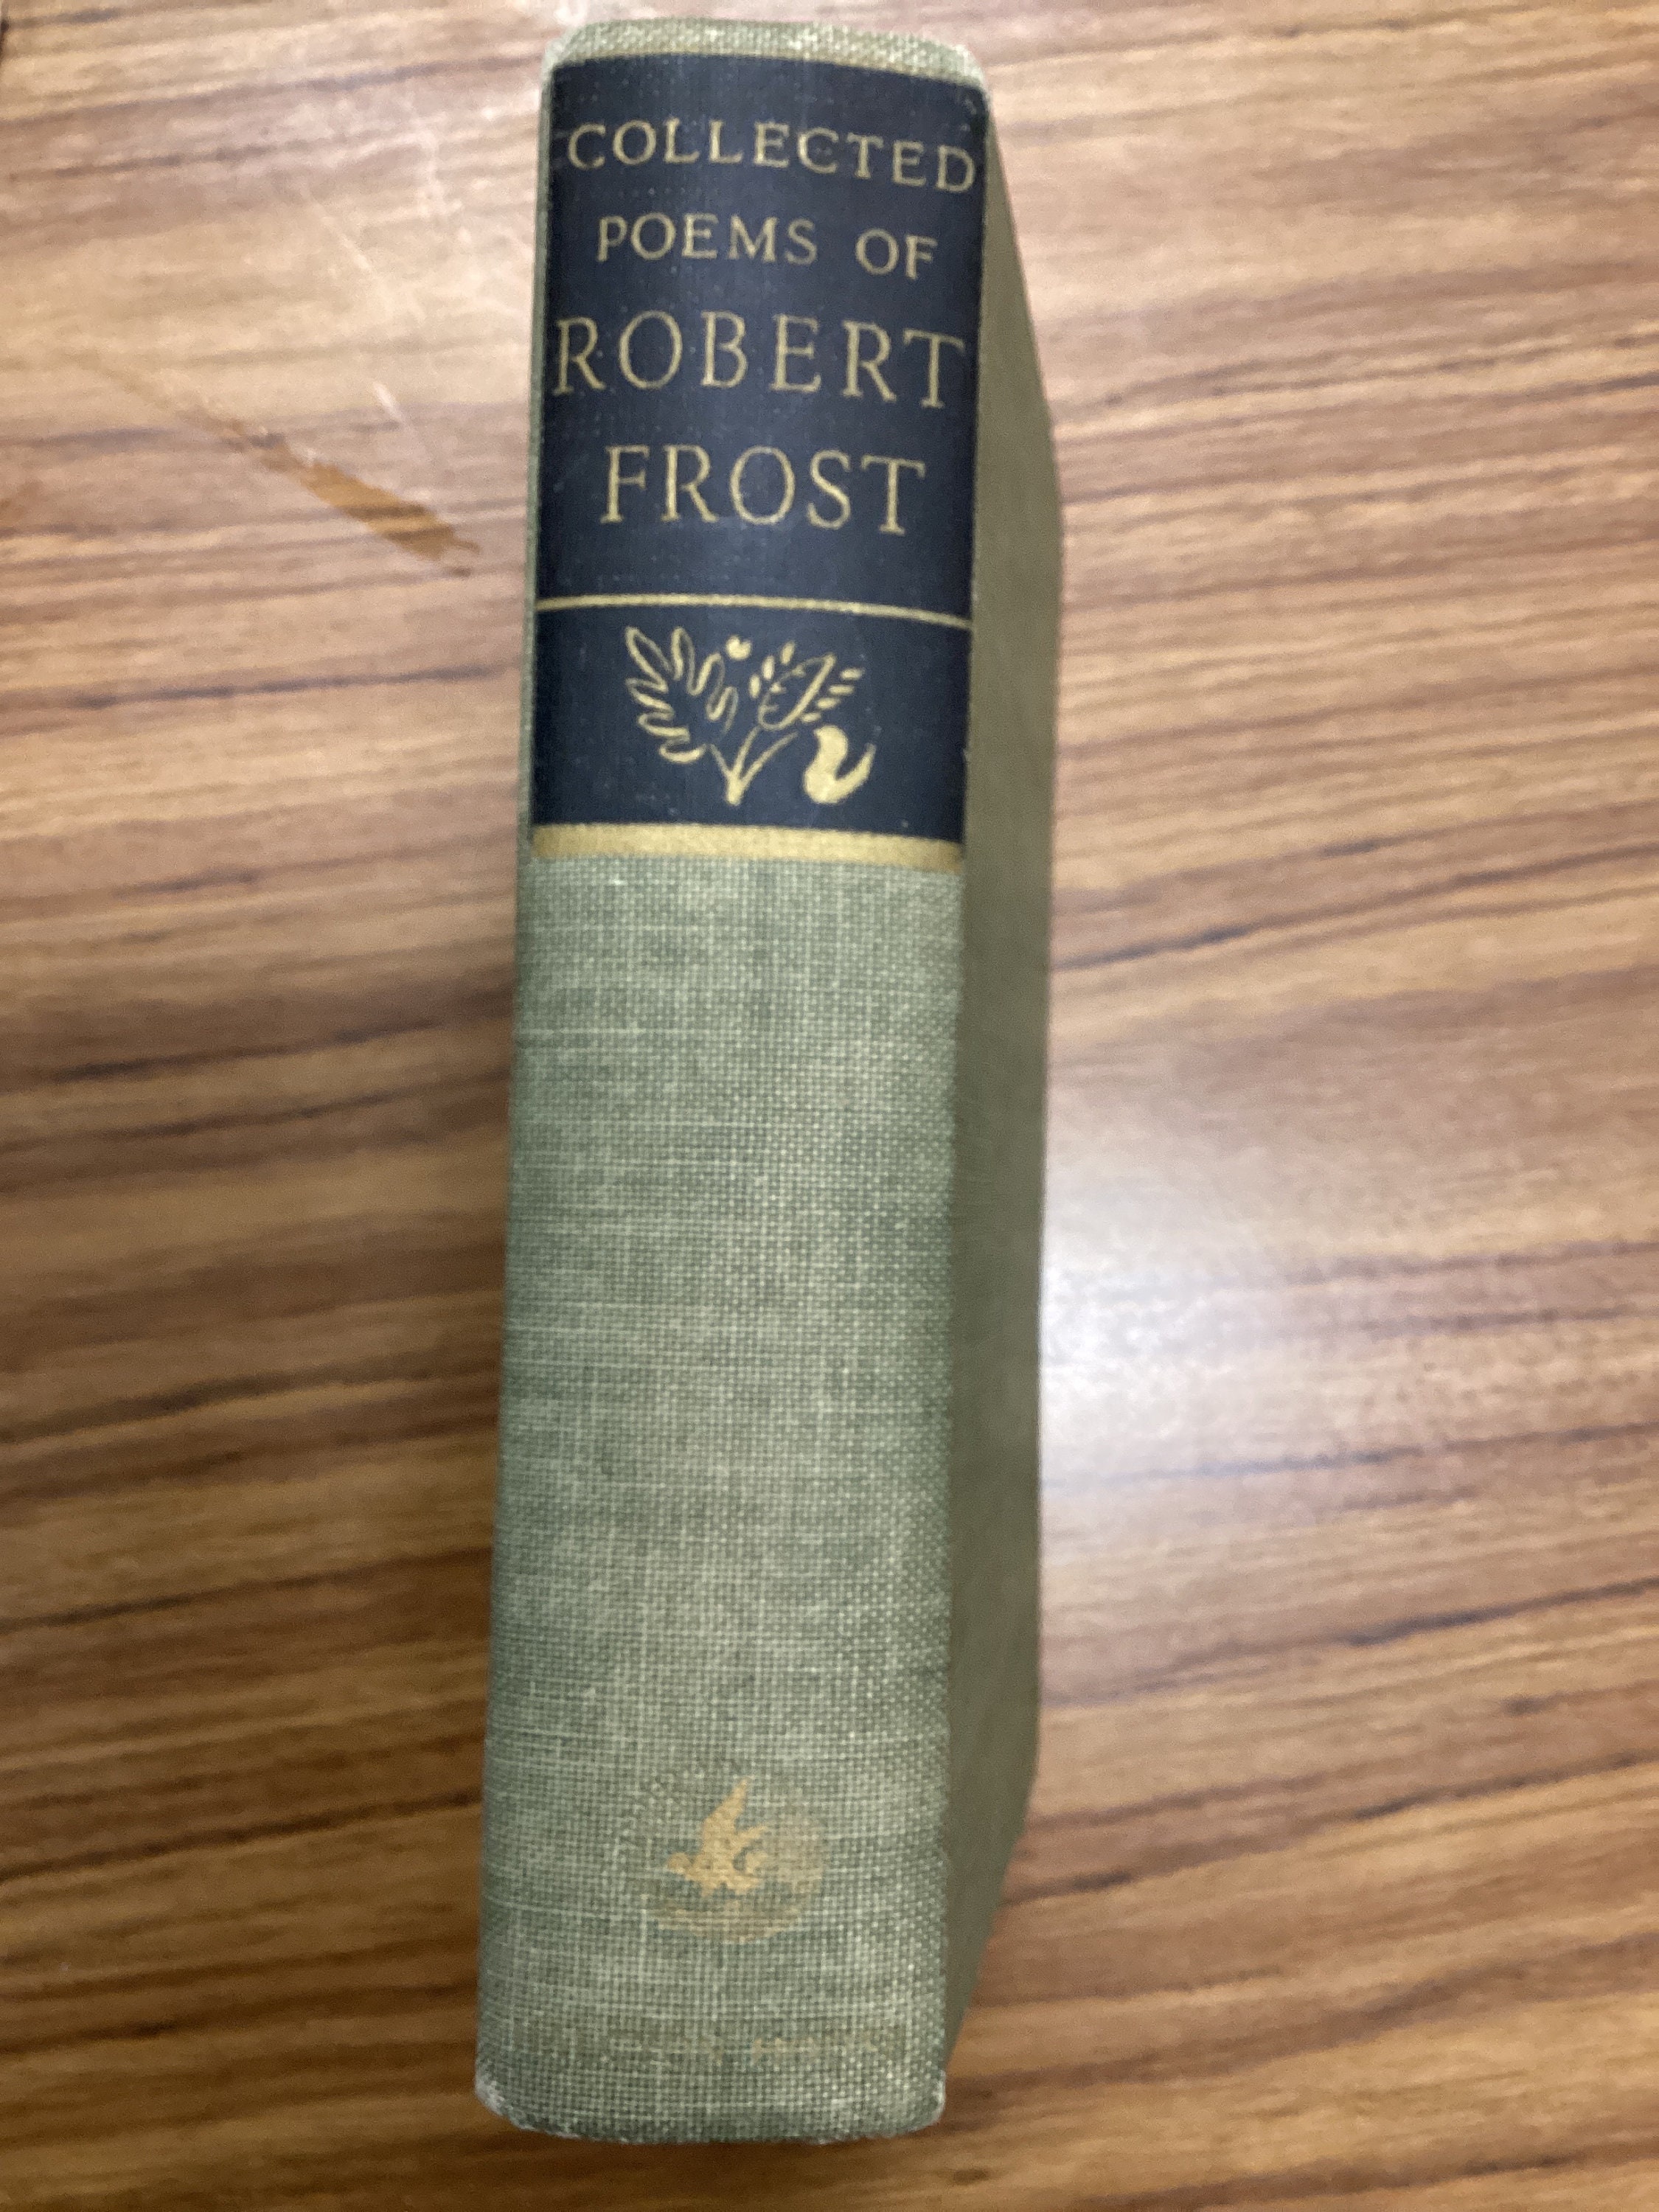 1939 COLLECTED POEMS of ROBERT Frost by Robert Frost pic photo